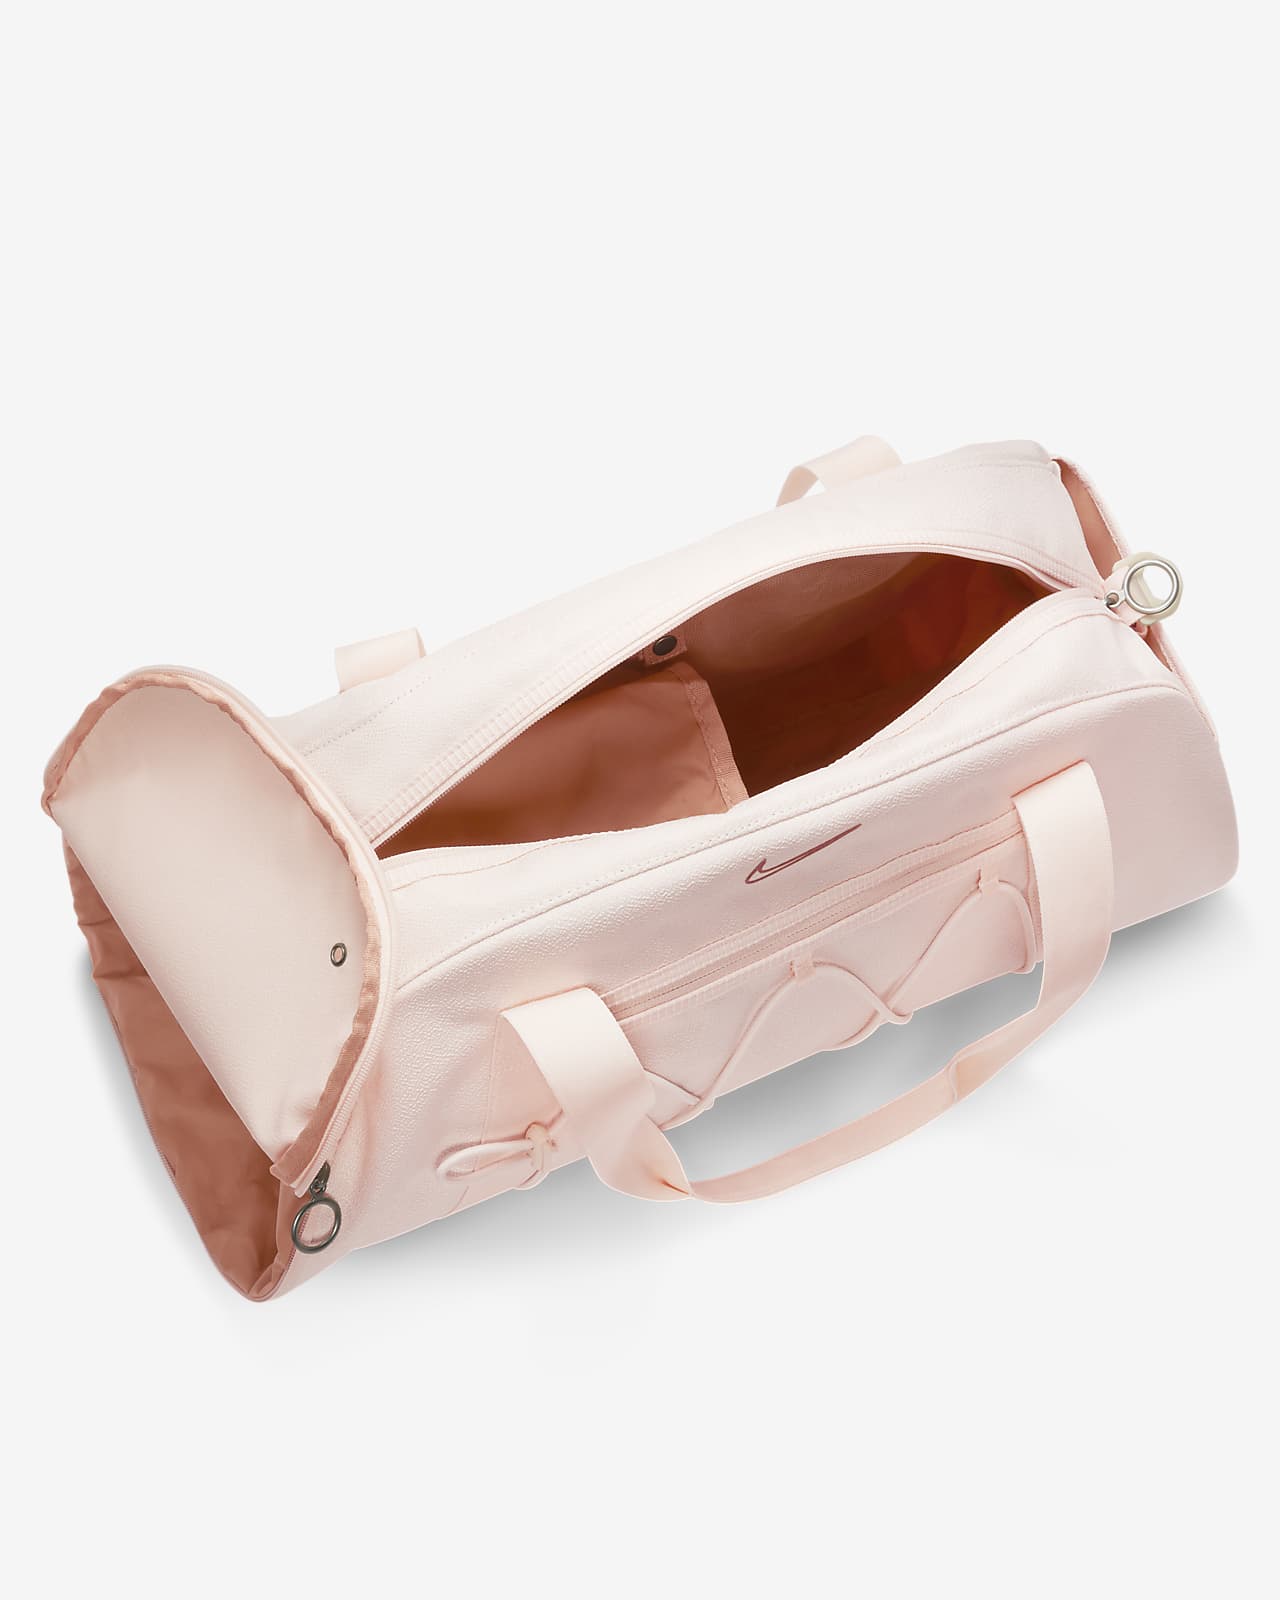 Nike One Luxe Women's Training Bag (32L) Original Price: 152$ Buy now: 89€  🏷️